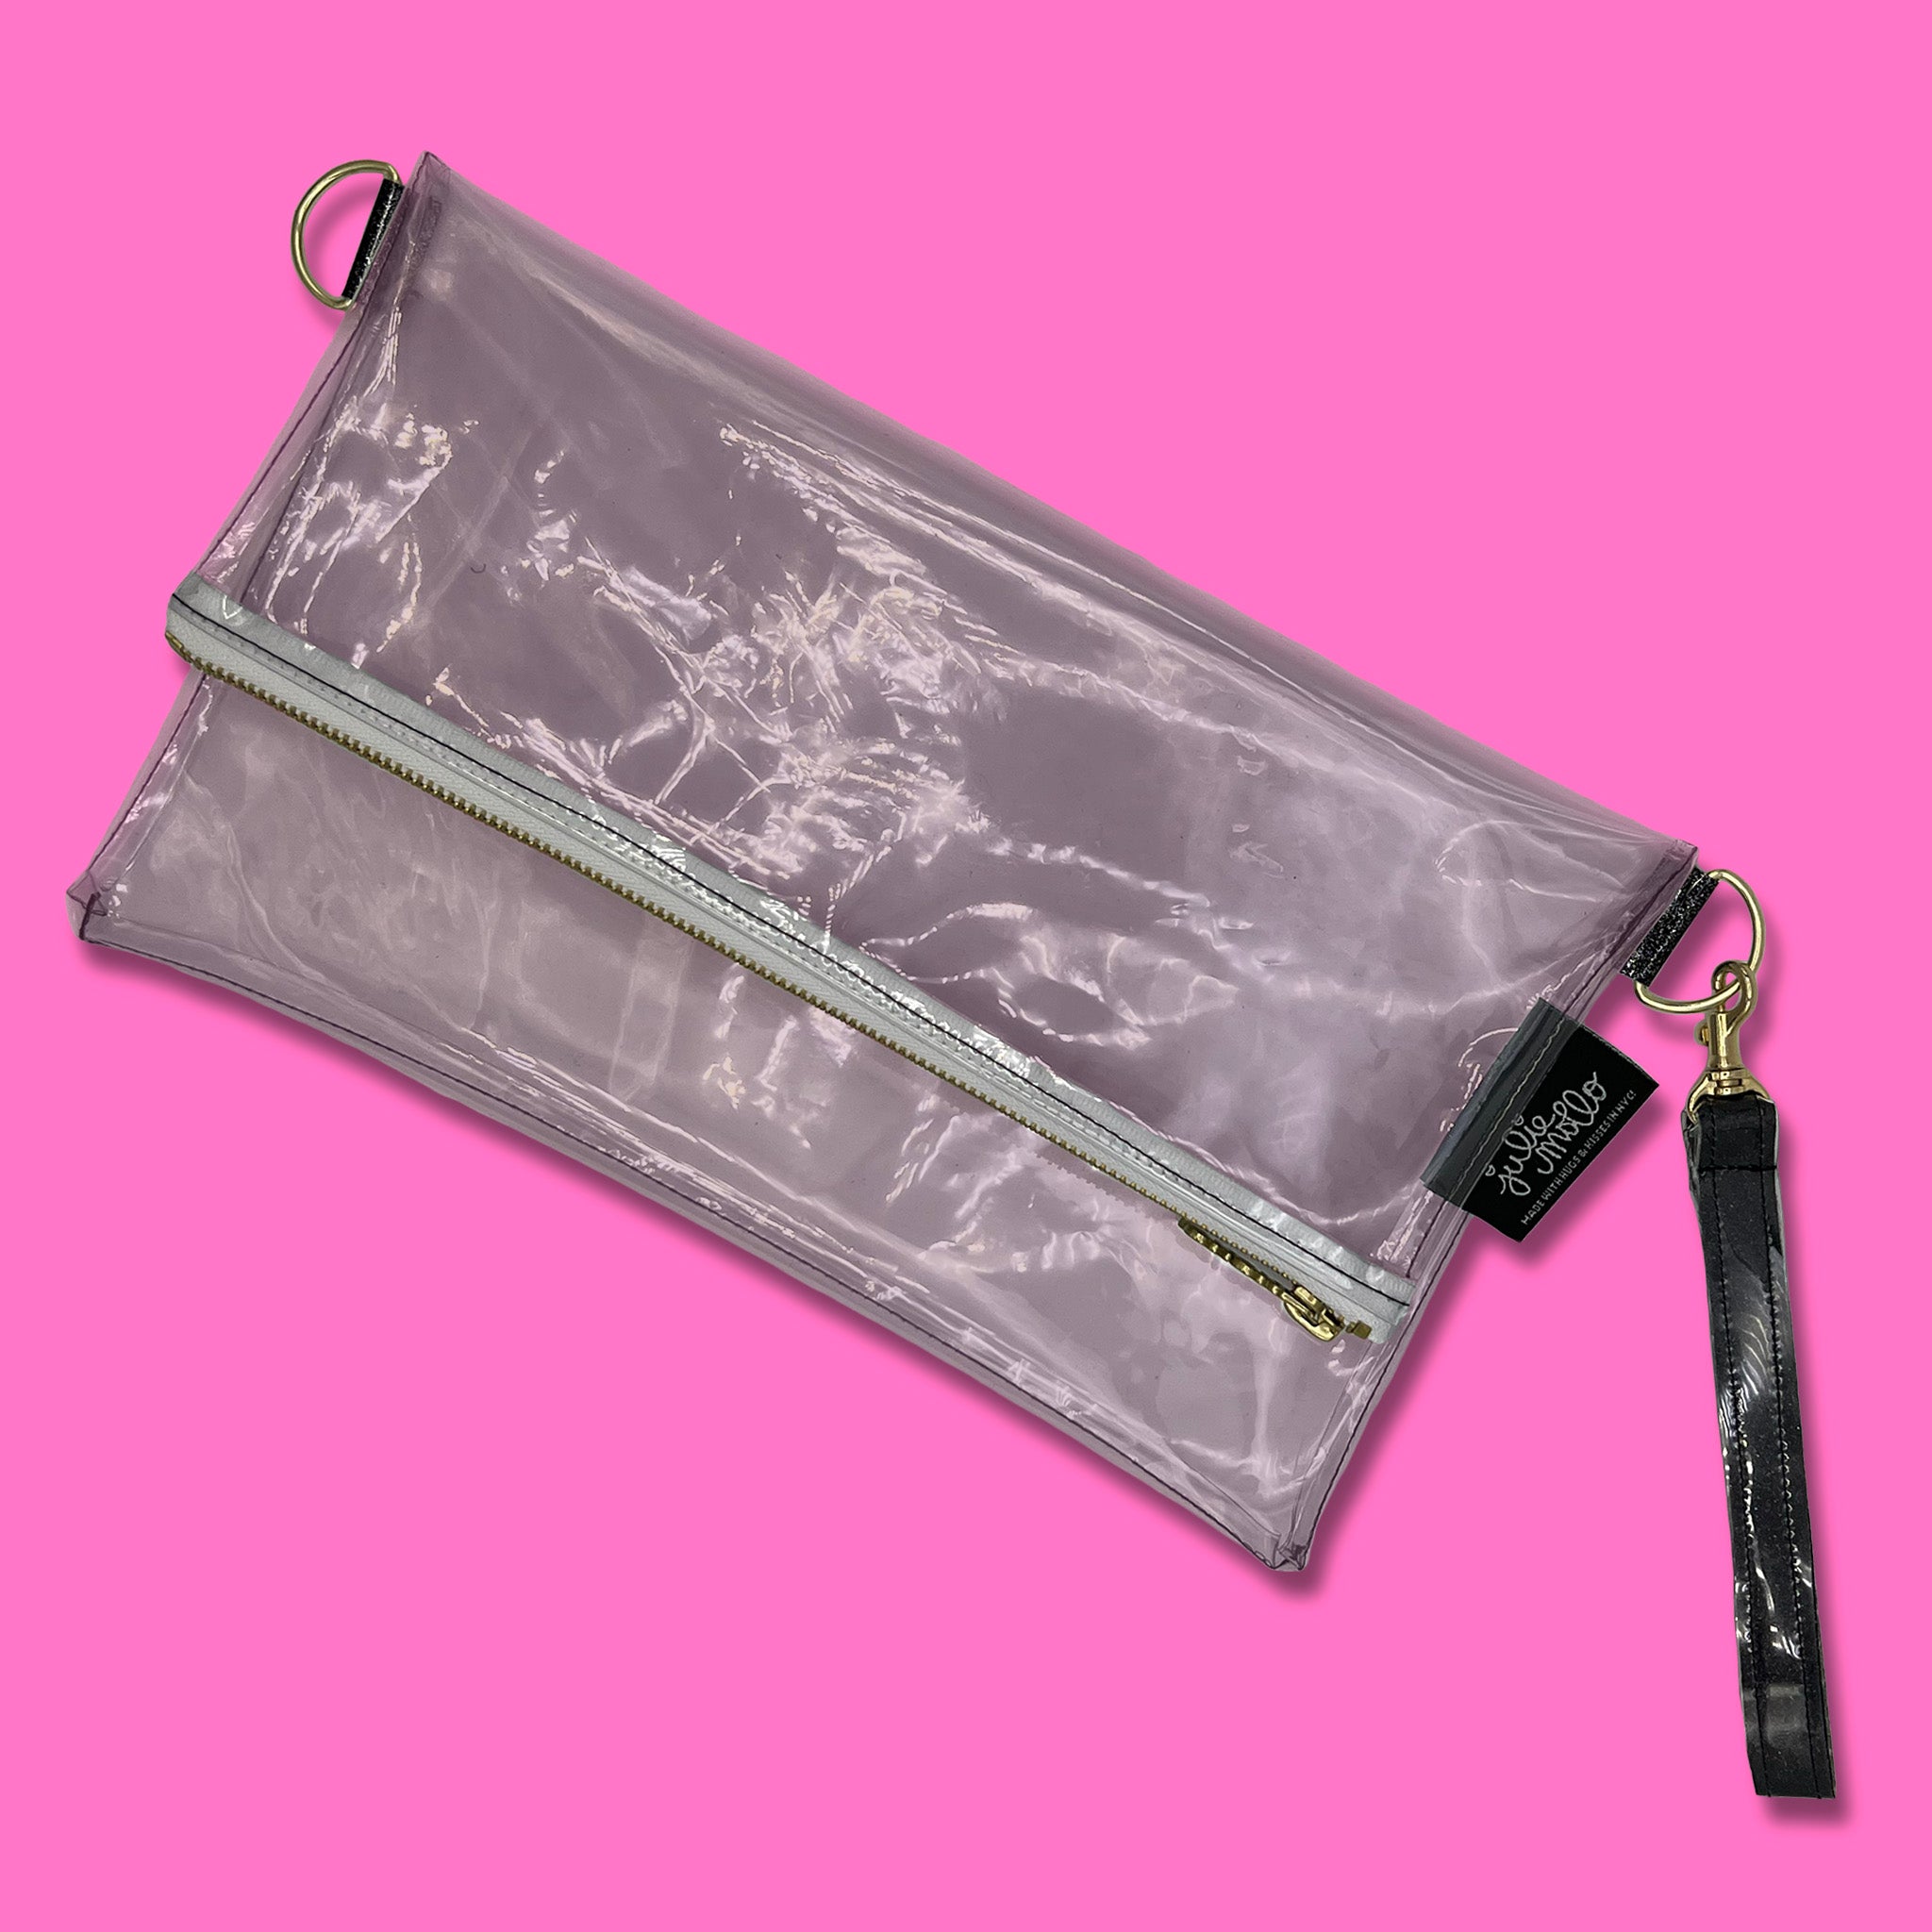 The Clear Convertible Concert Bag!